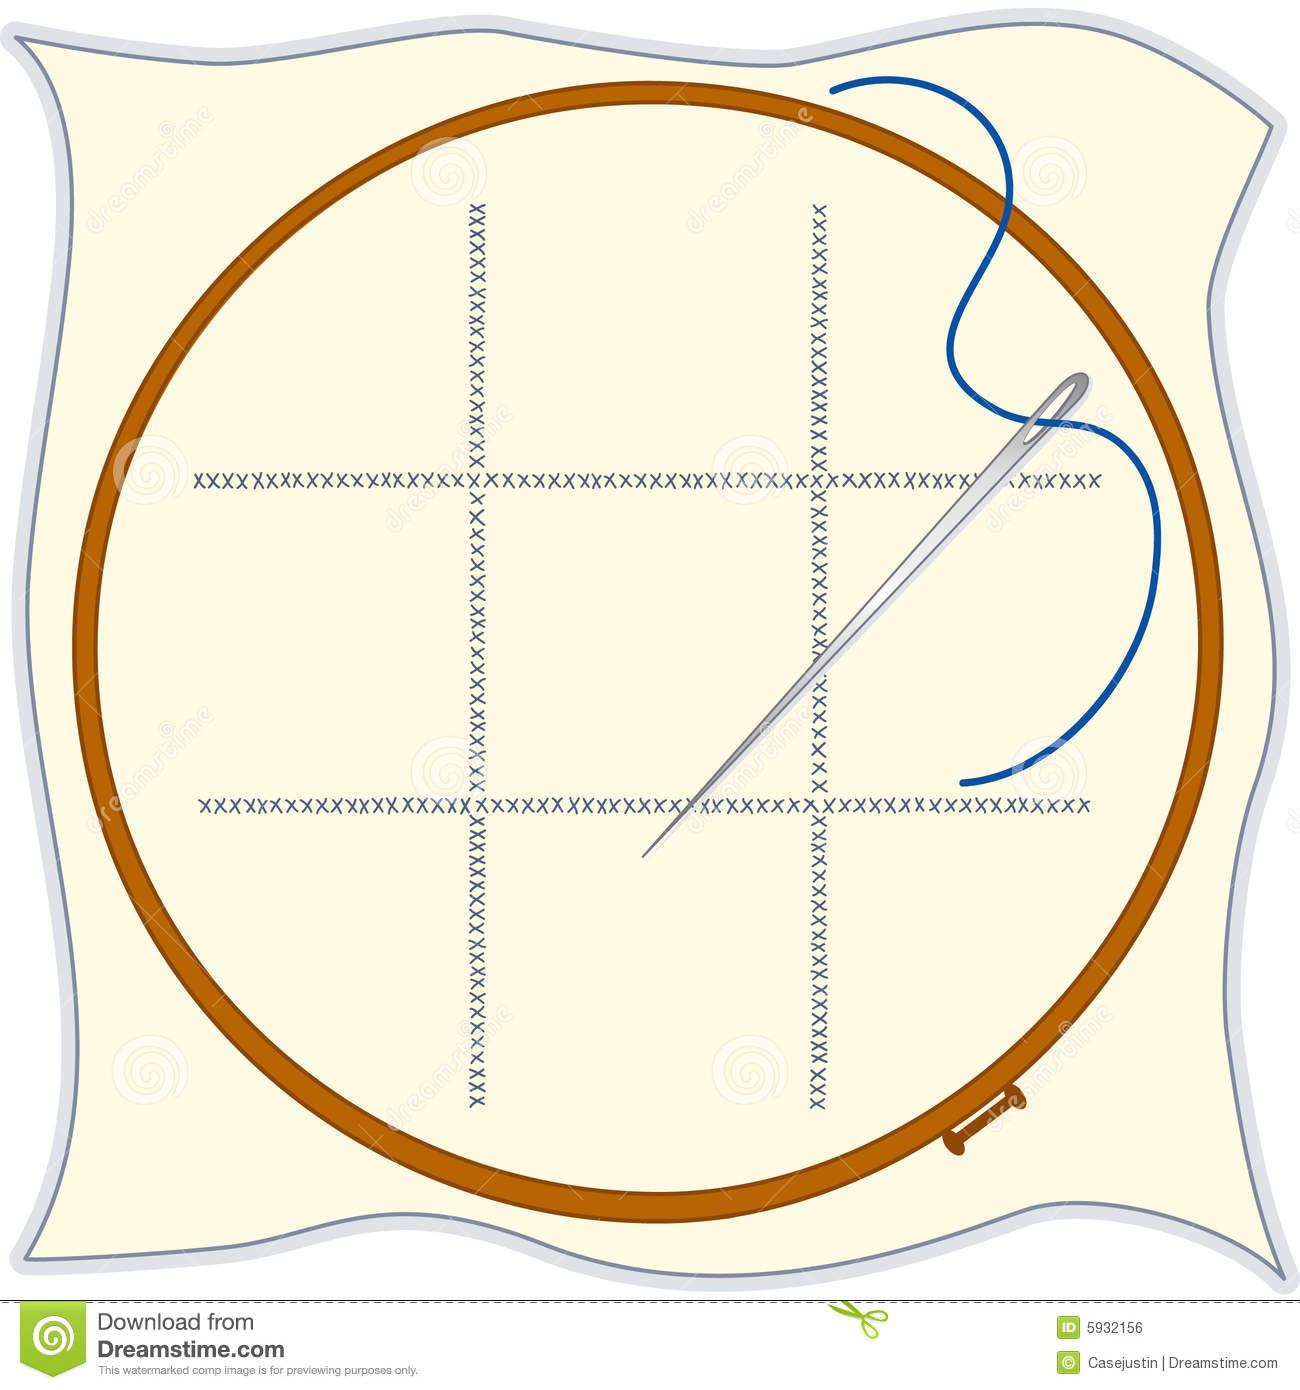 Embroidery Hoop Clipart.